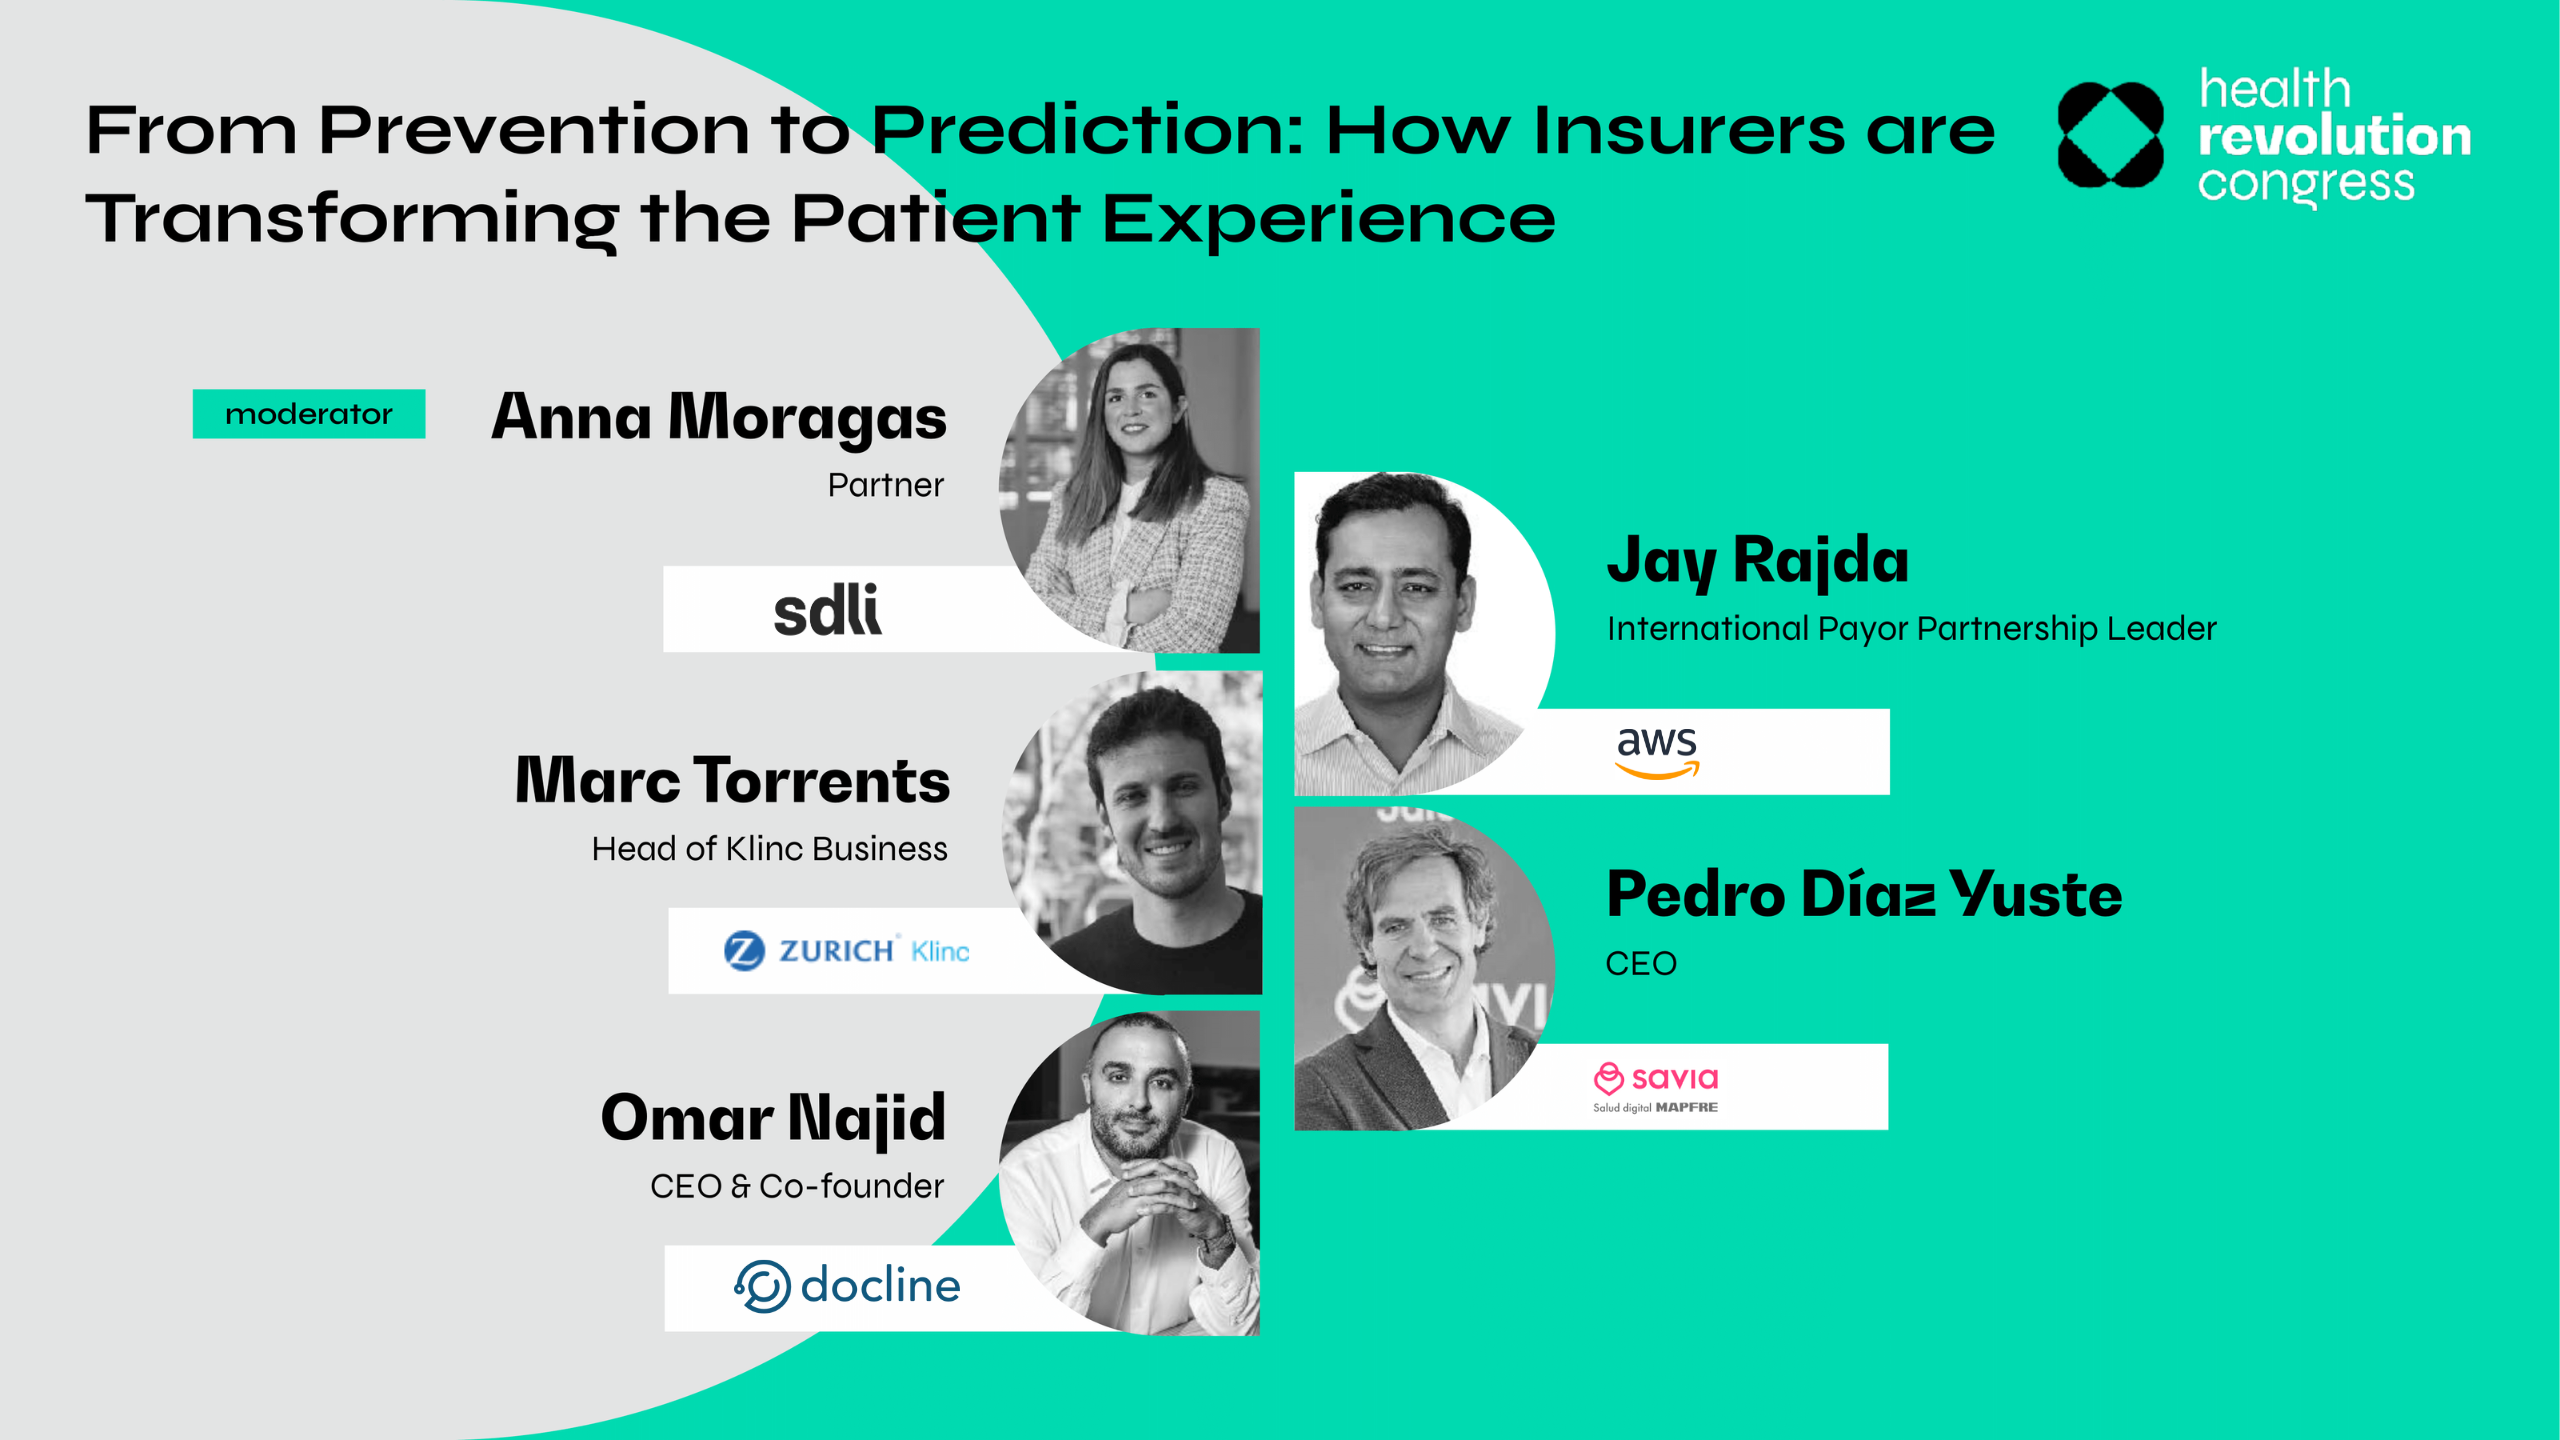 Discover “From Prevention to Prediction: How Insurers are Transforming the Patient Experience” at the Health Revolution Congress